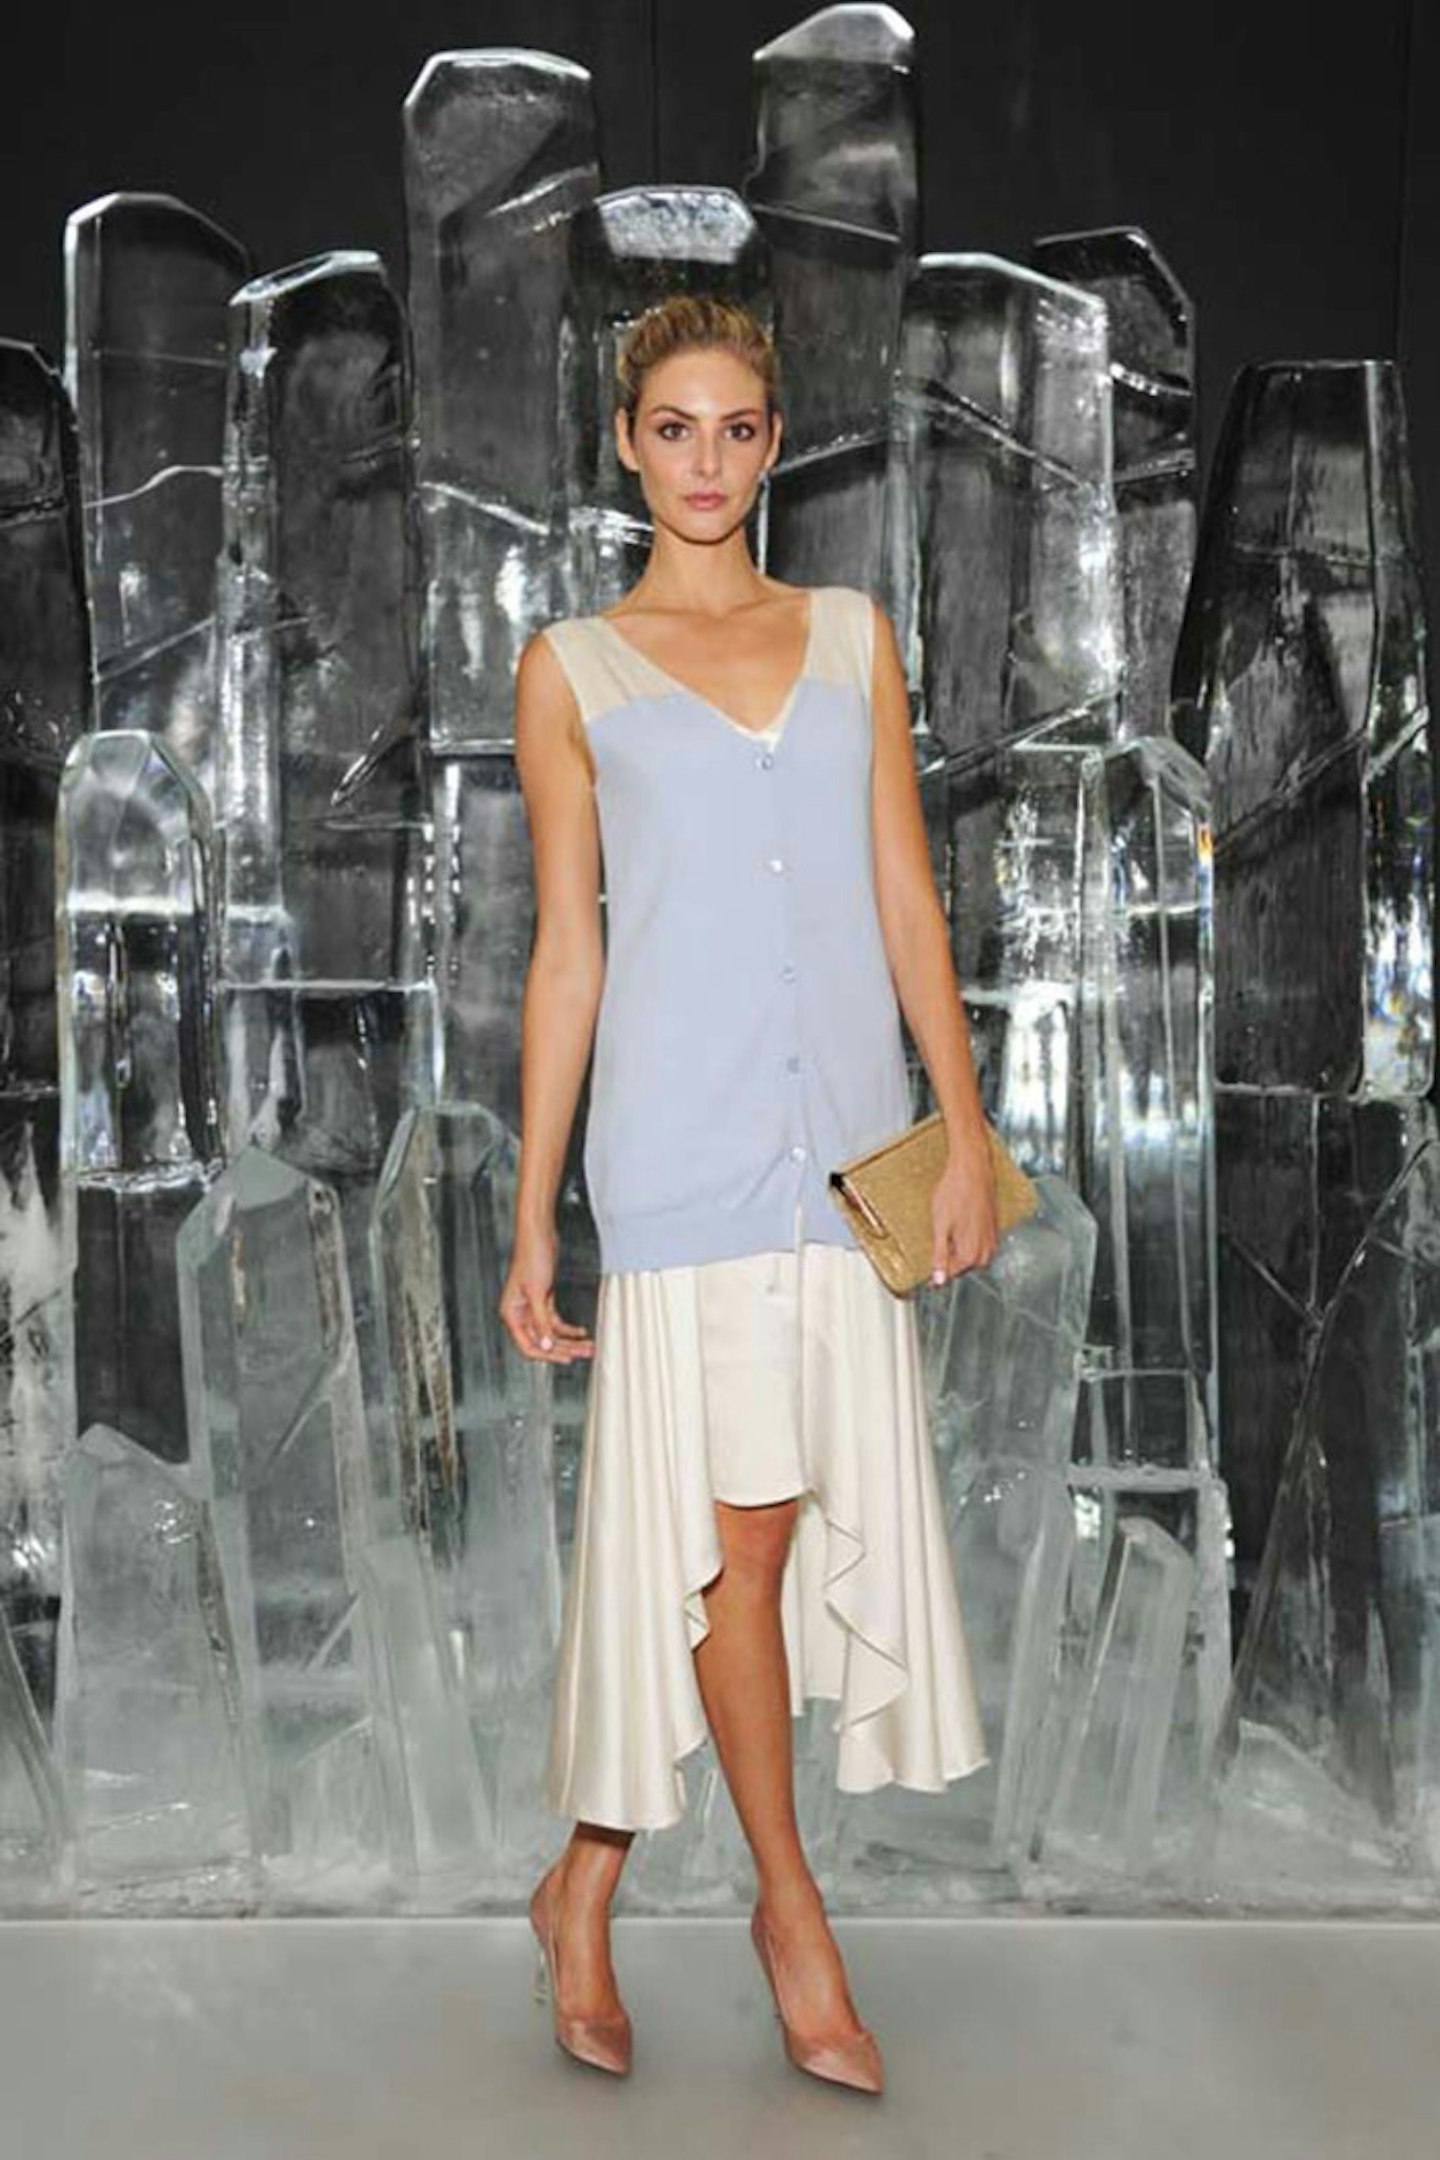 Tamsin Egerton at The Jimmy Choo Vices Collection Dinner